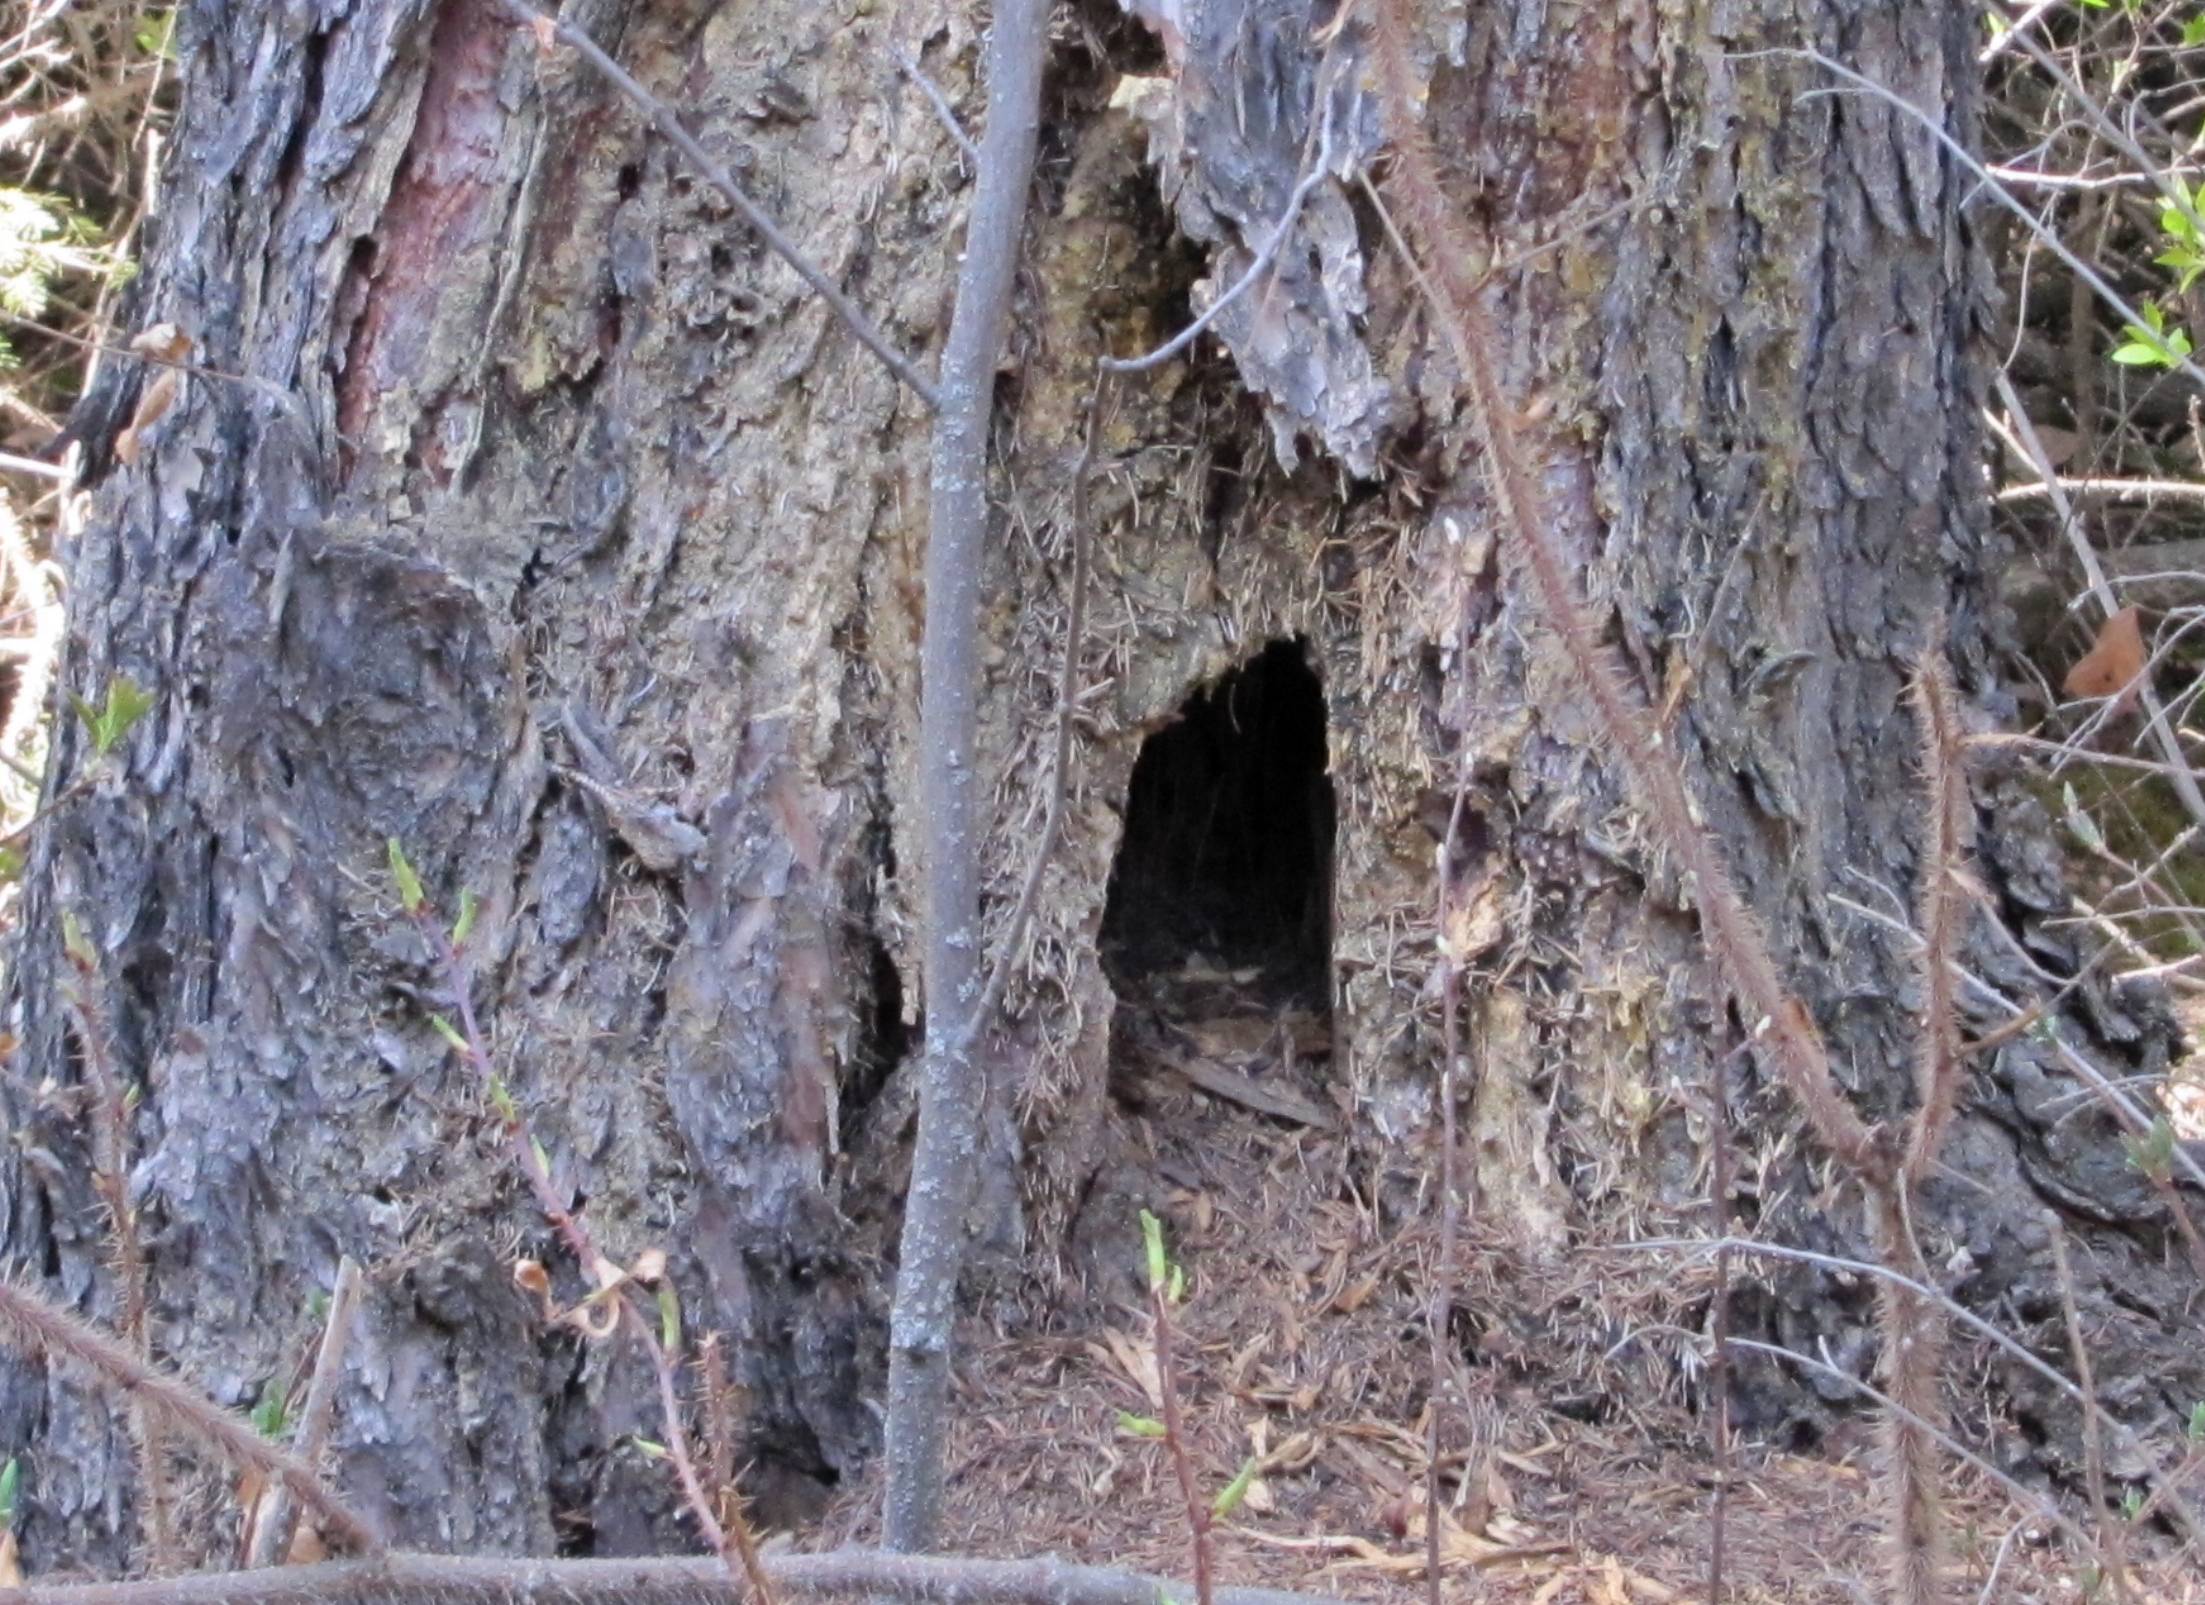 The Squirrel's House